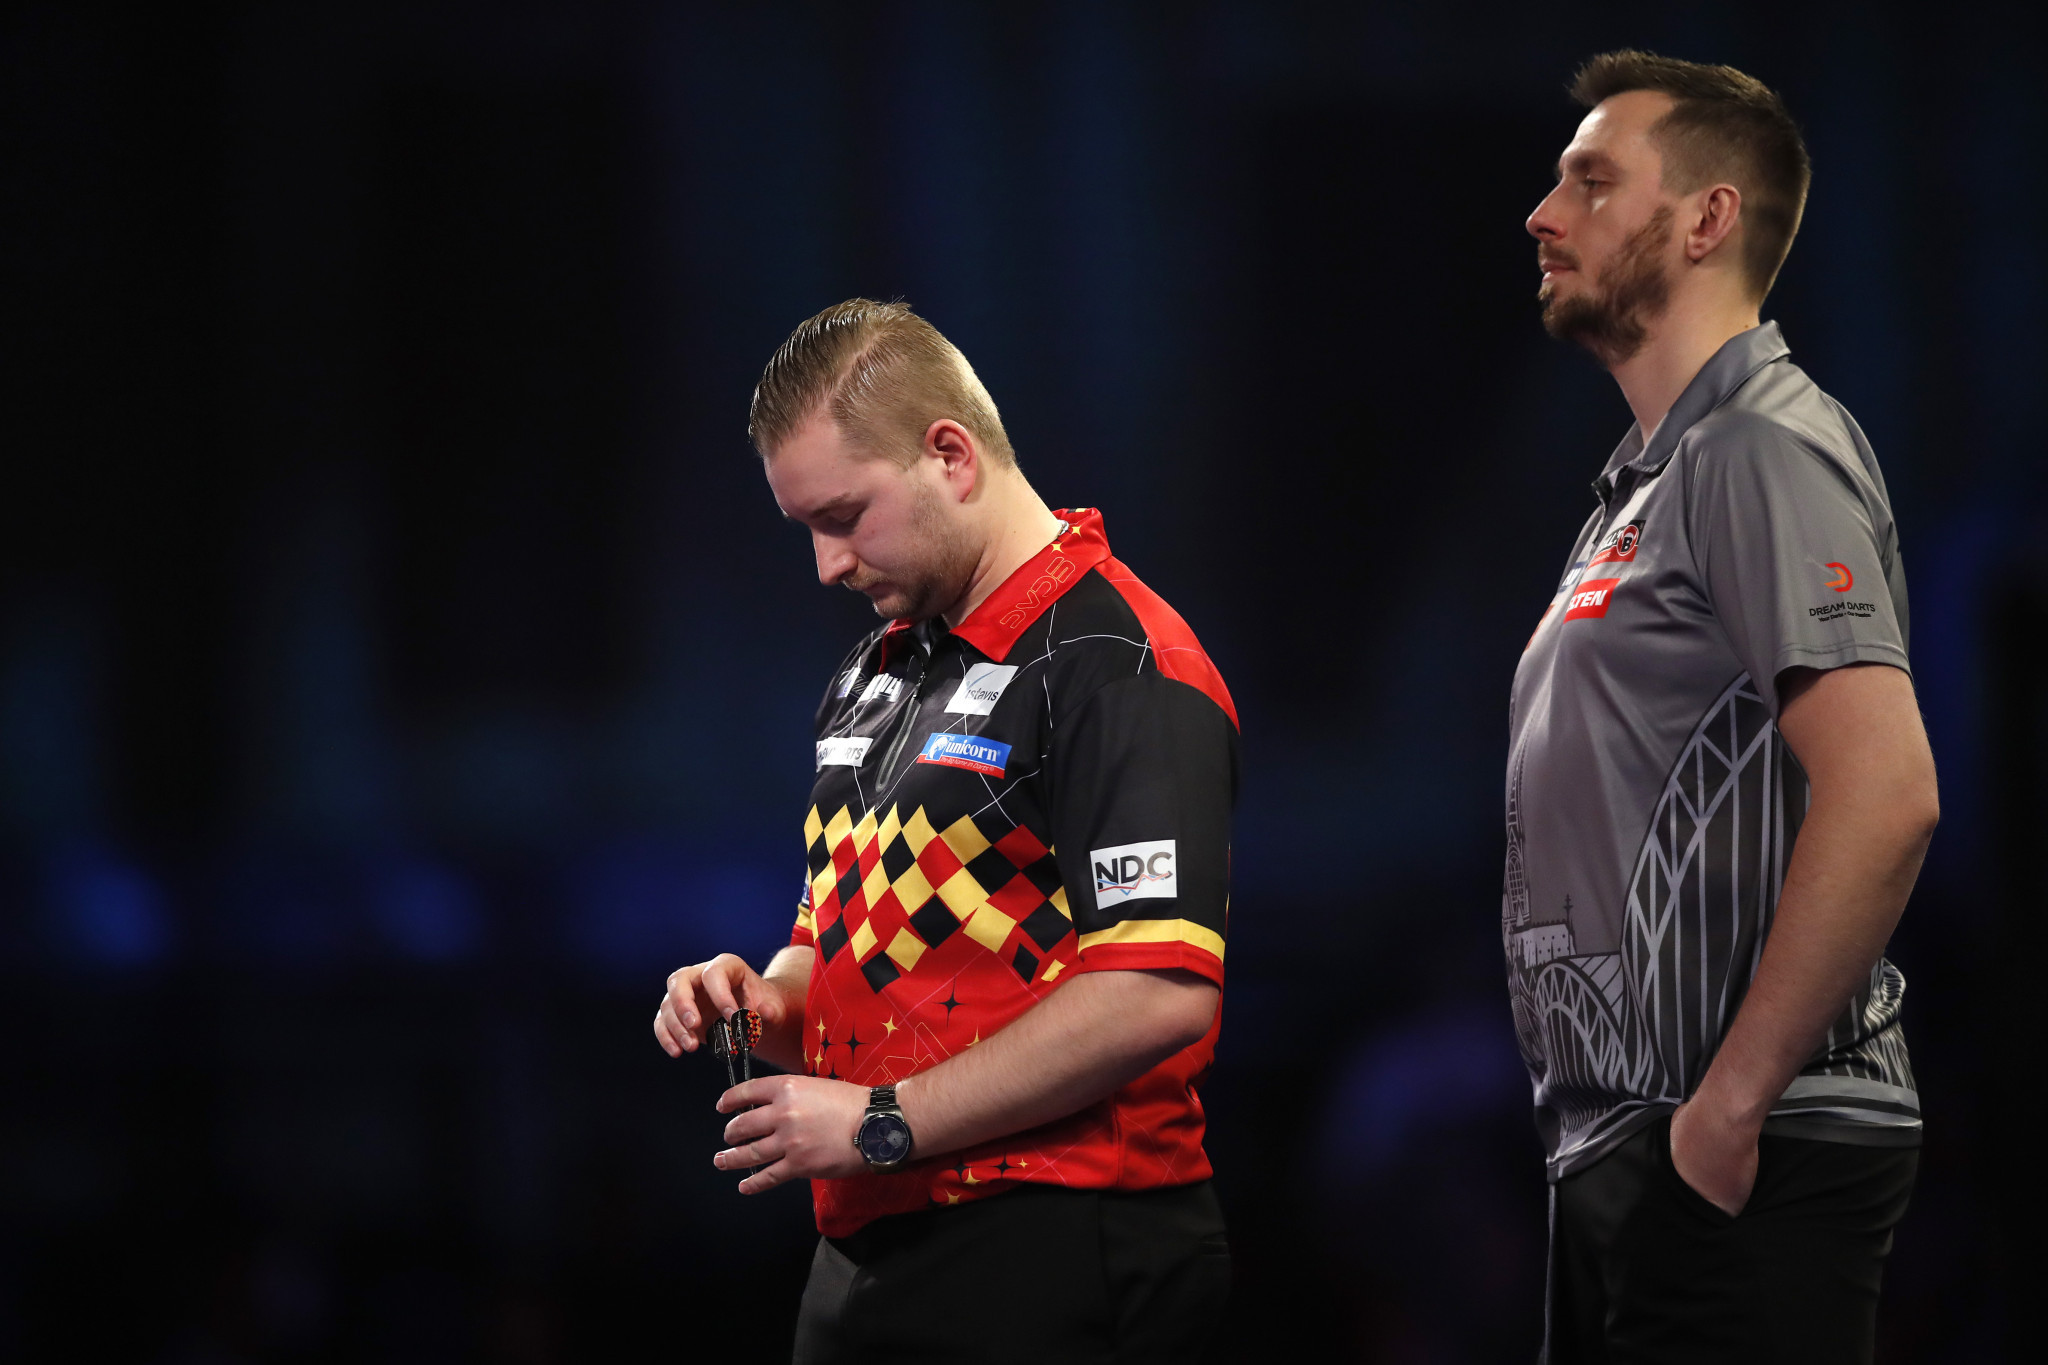 Dimitri Van den Bergh, left, has crashed out of the World Darts Championship ©Getty Images